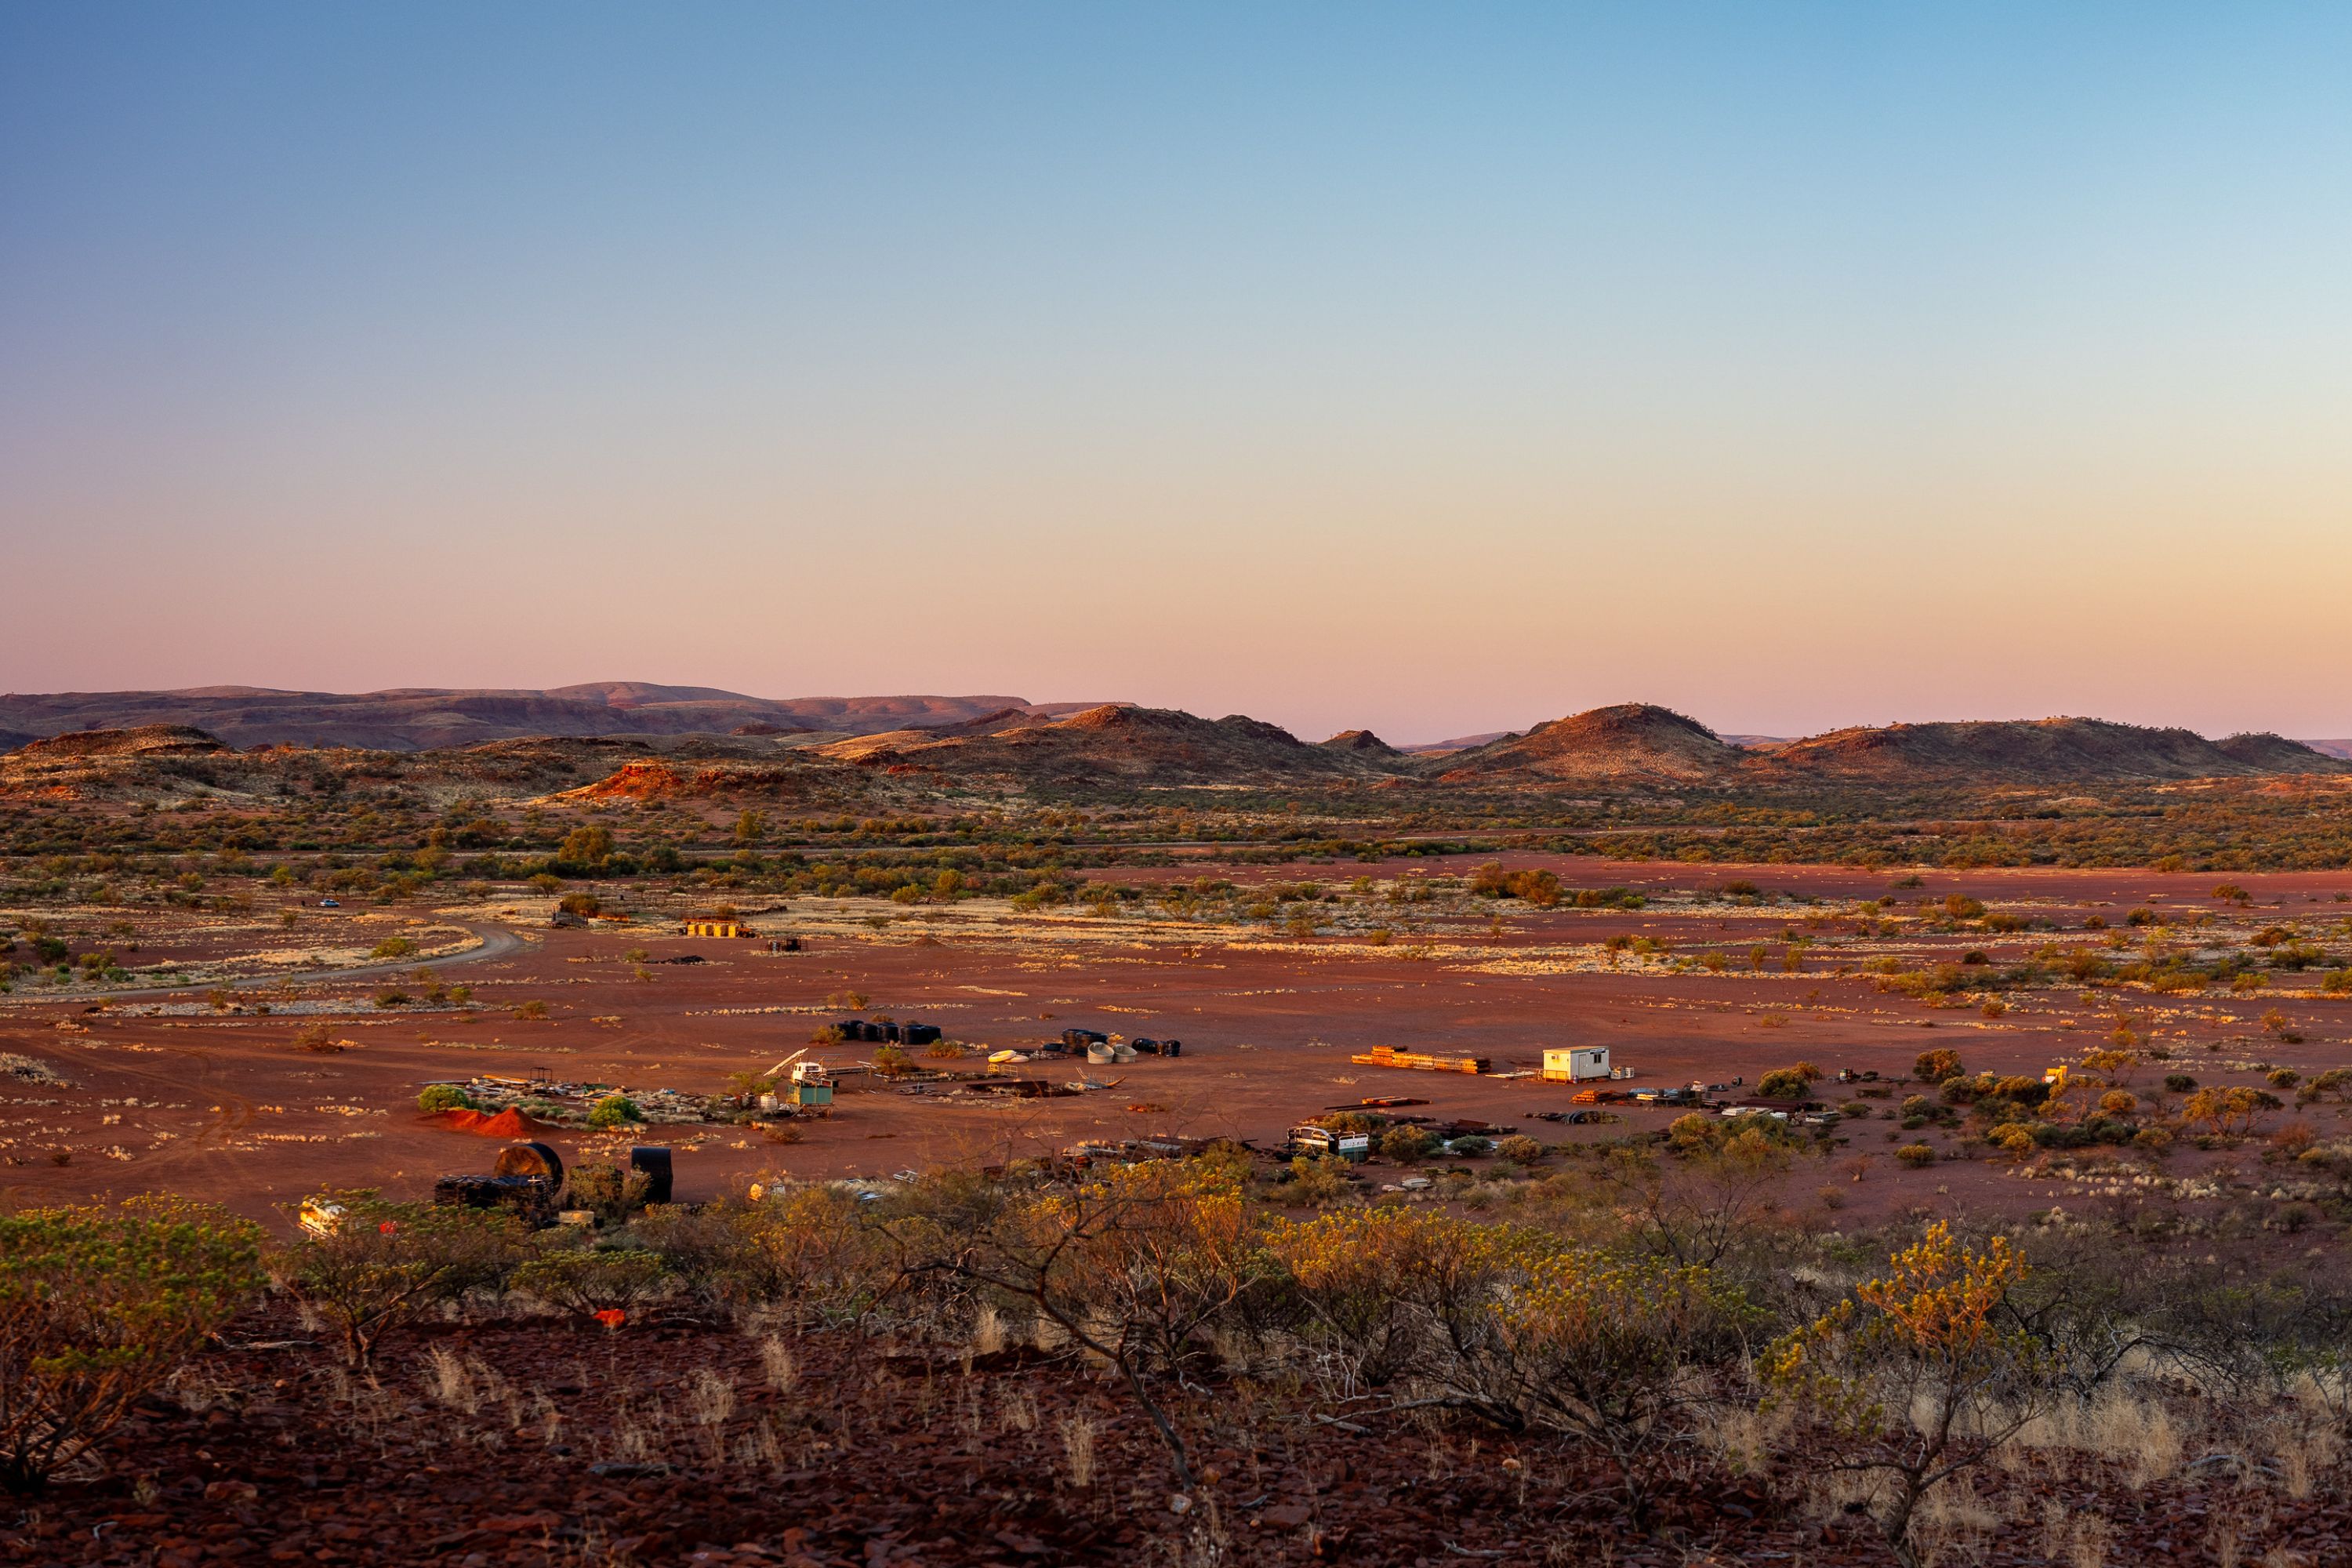 Landscape shot of farmland in Western Australia at sunset, surrounded by hills